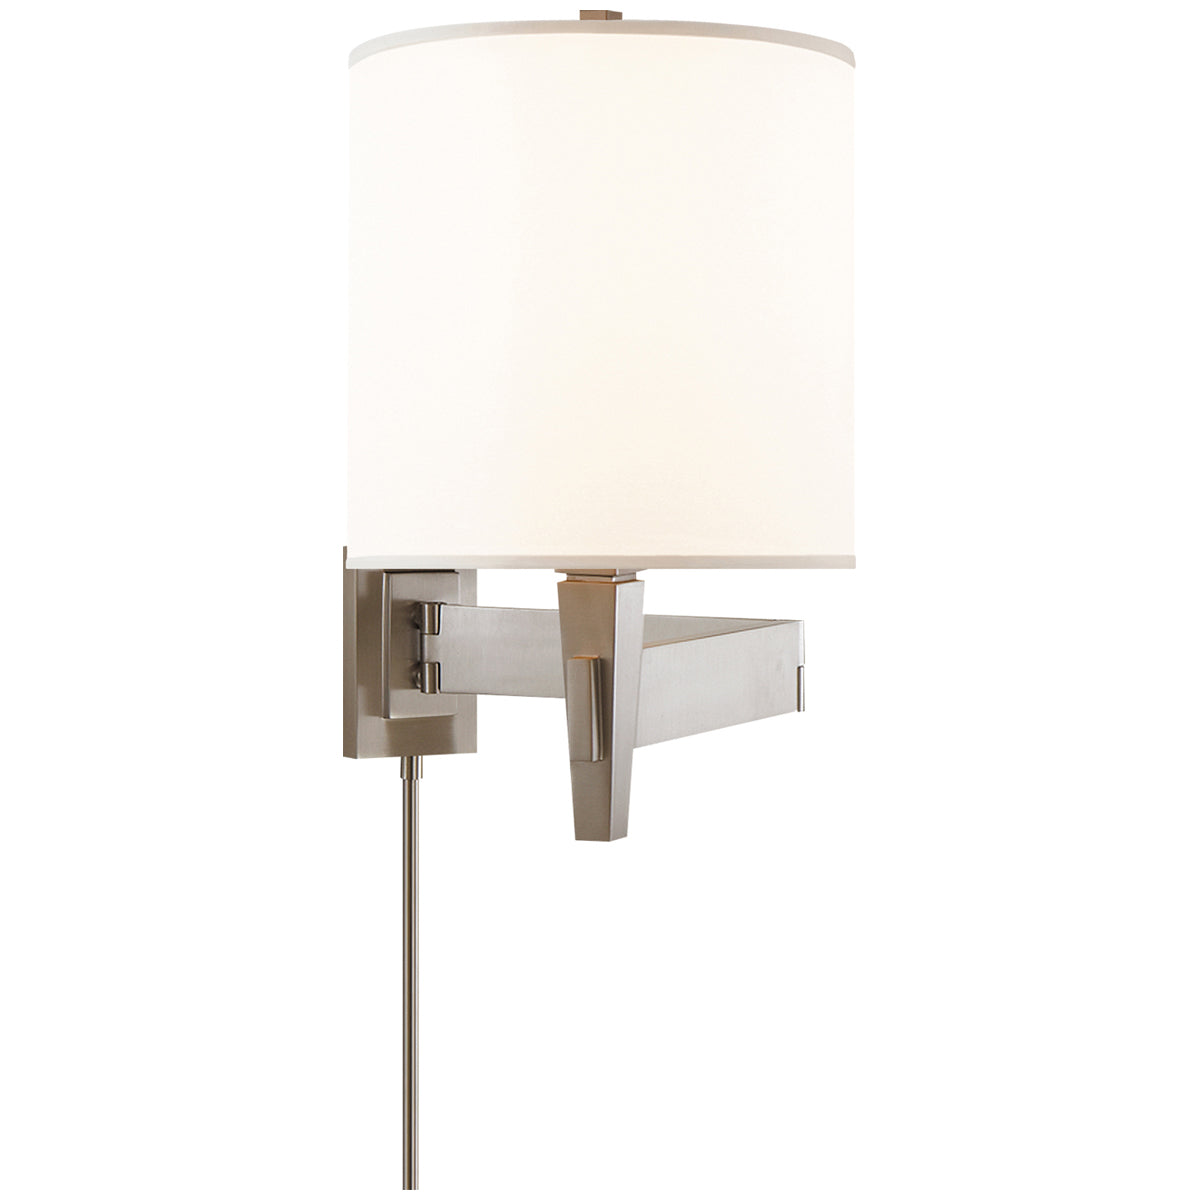 Visual Comfort Architect's Swing Arm Sconce